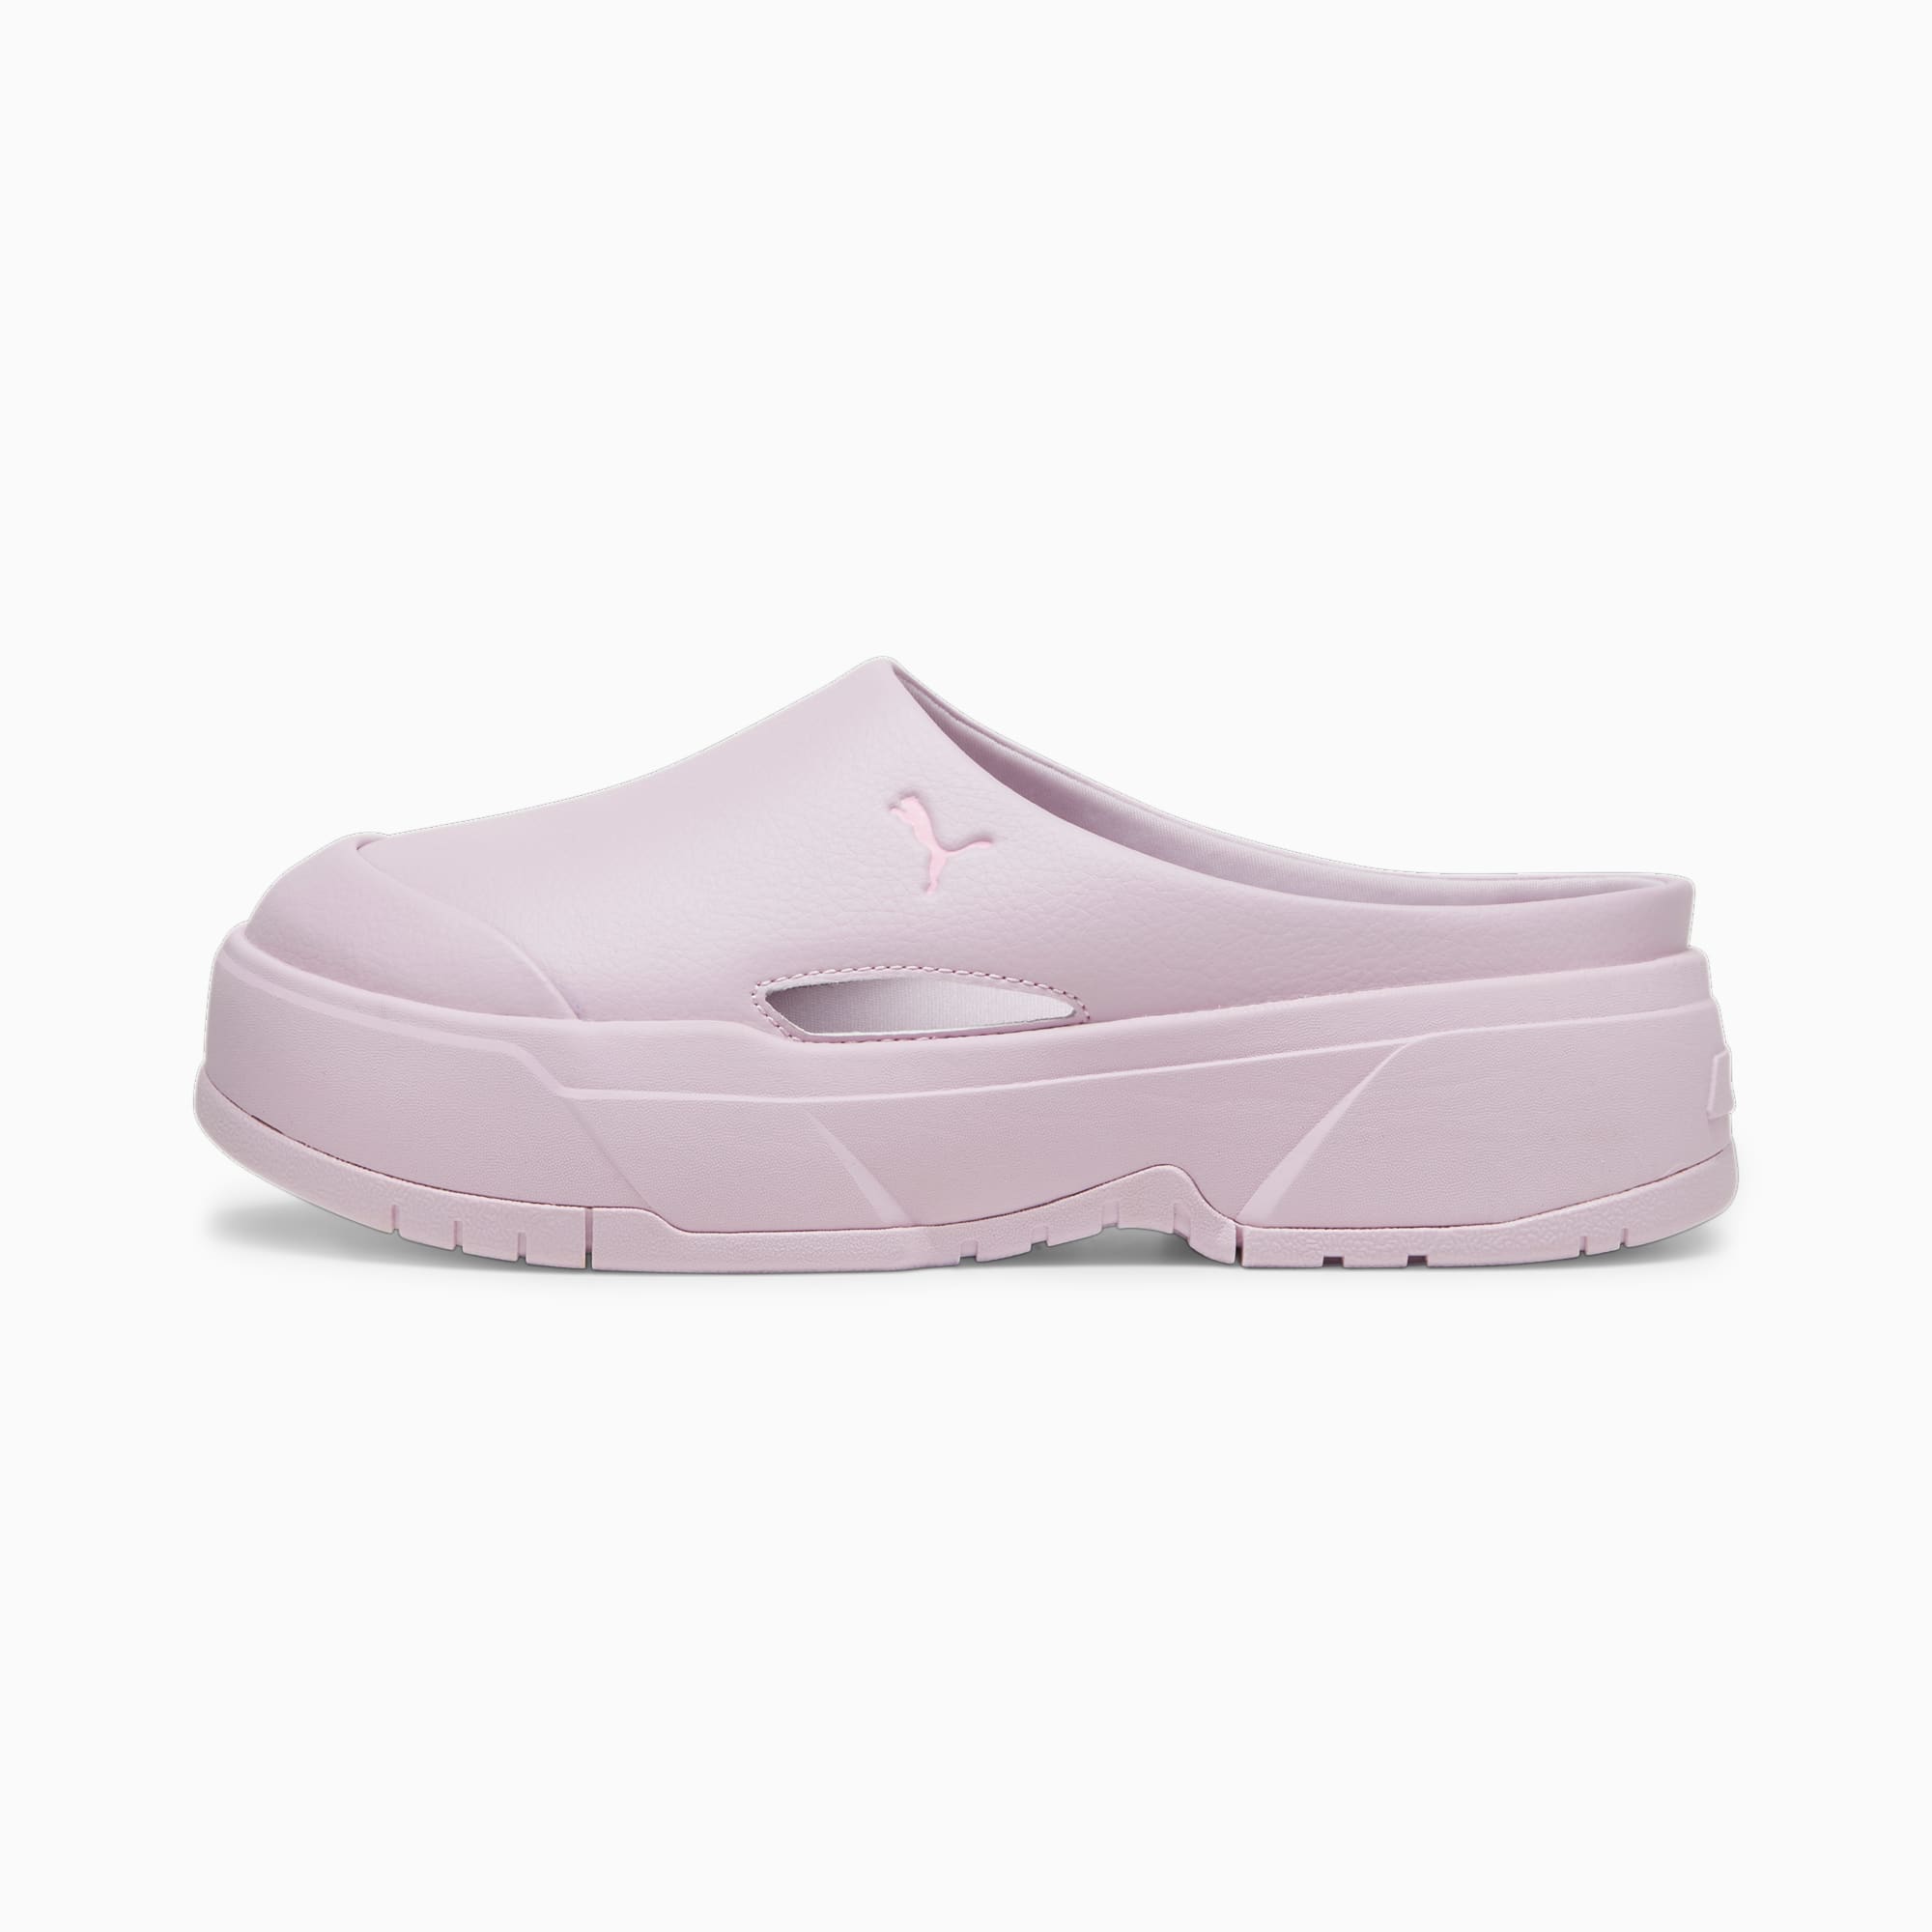 puma chaussure mules ca mule femme, violet/rose, taille 38, chaussures